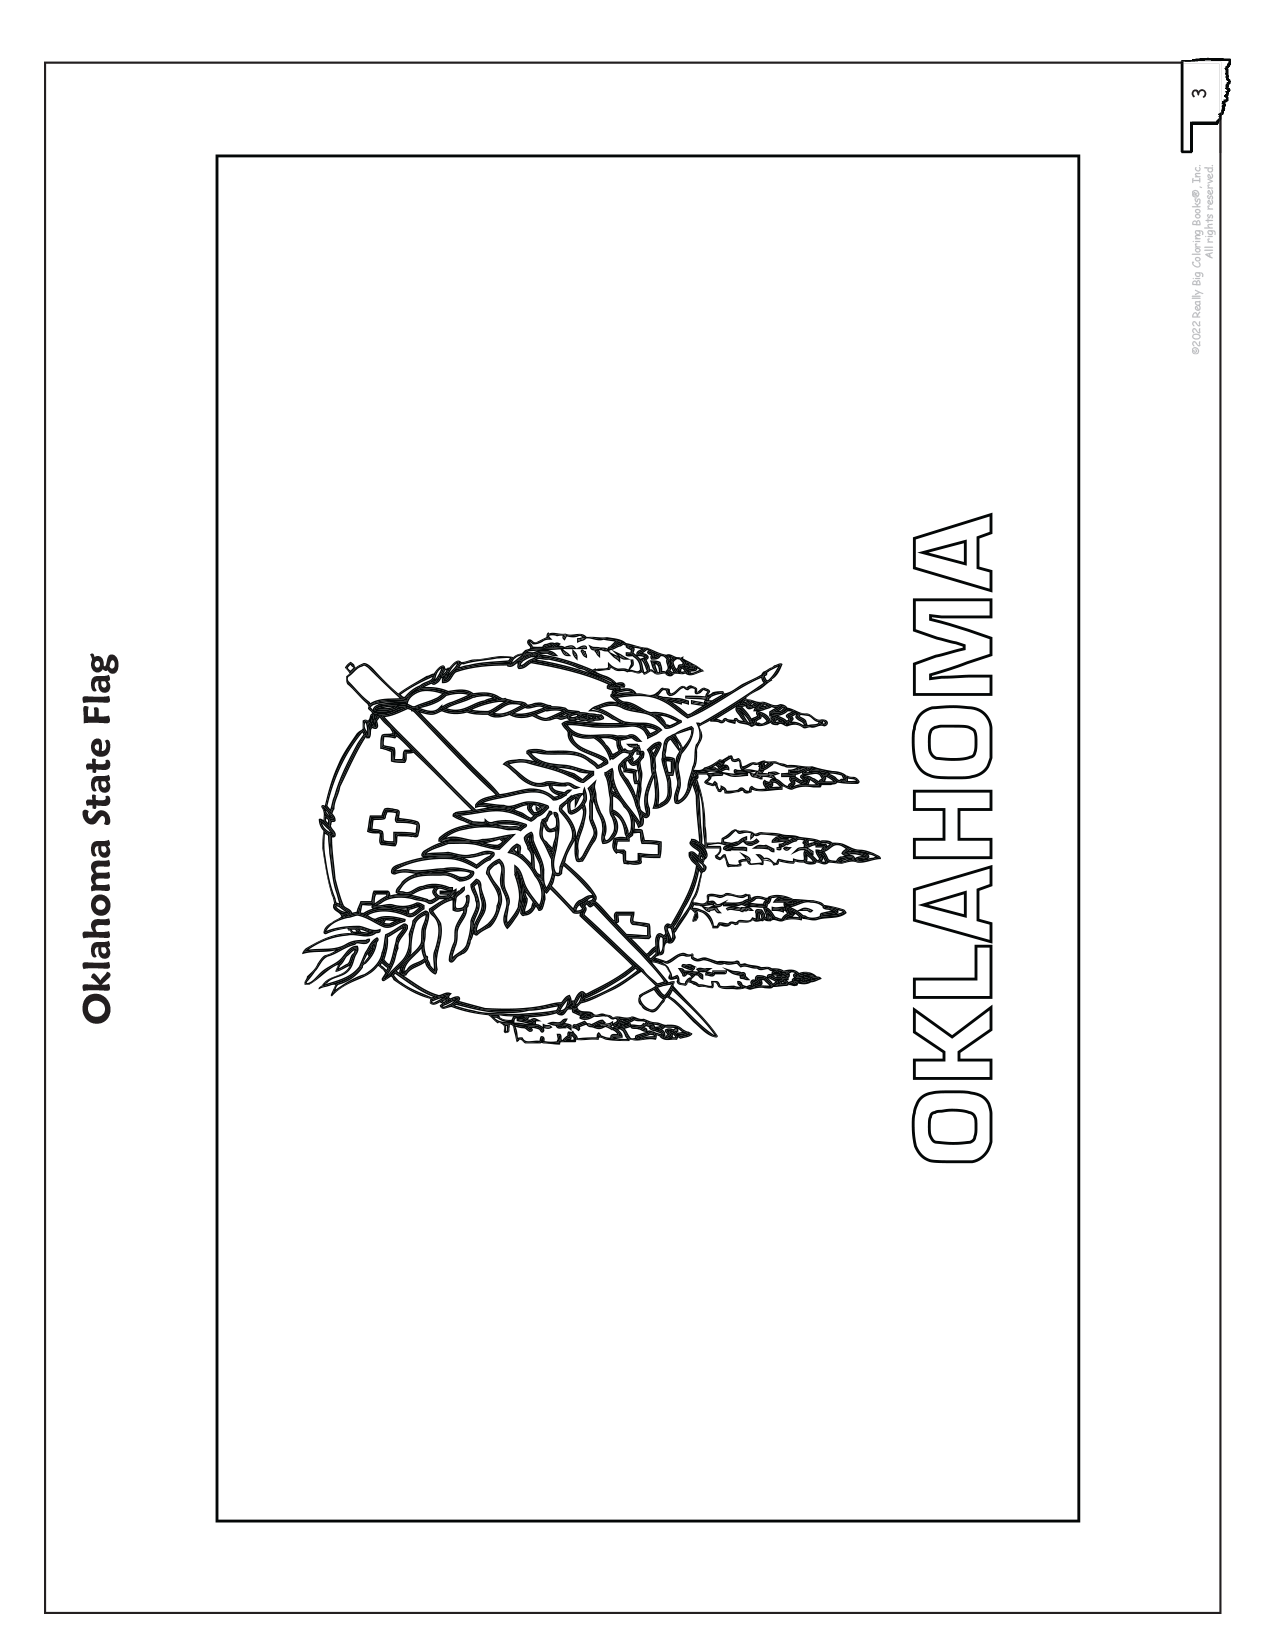 Oklahoma State Flag Coloring Page